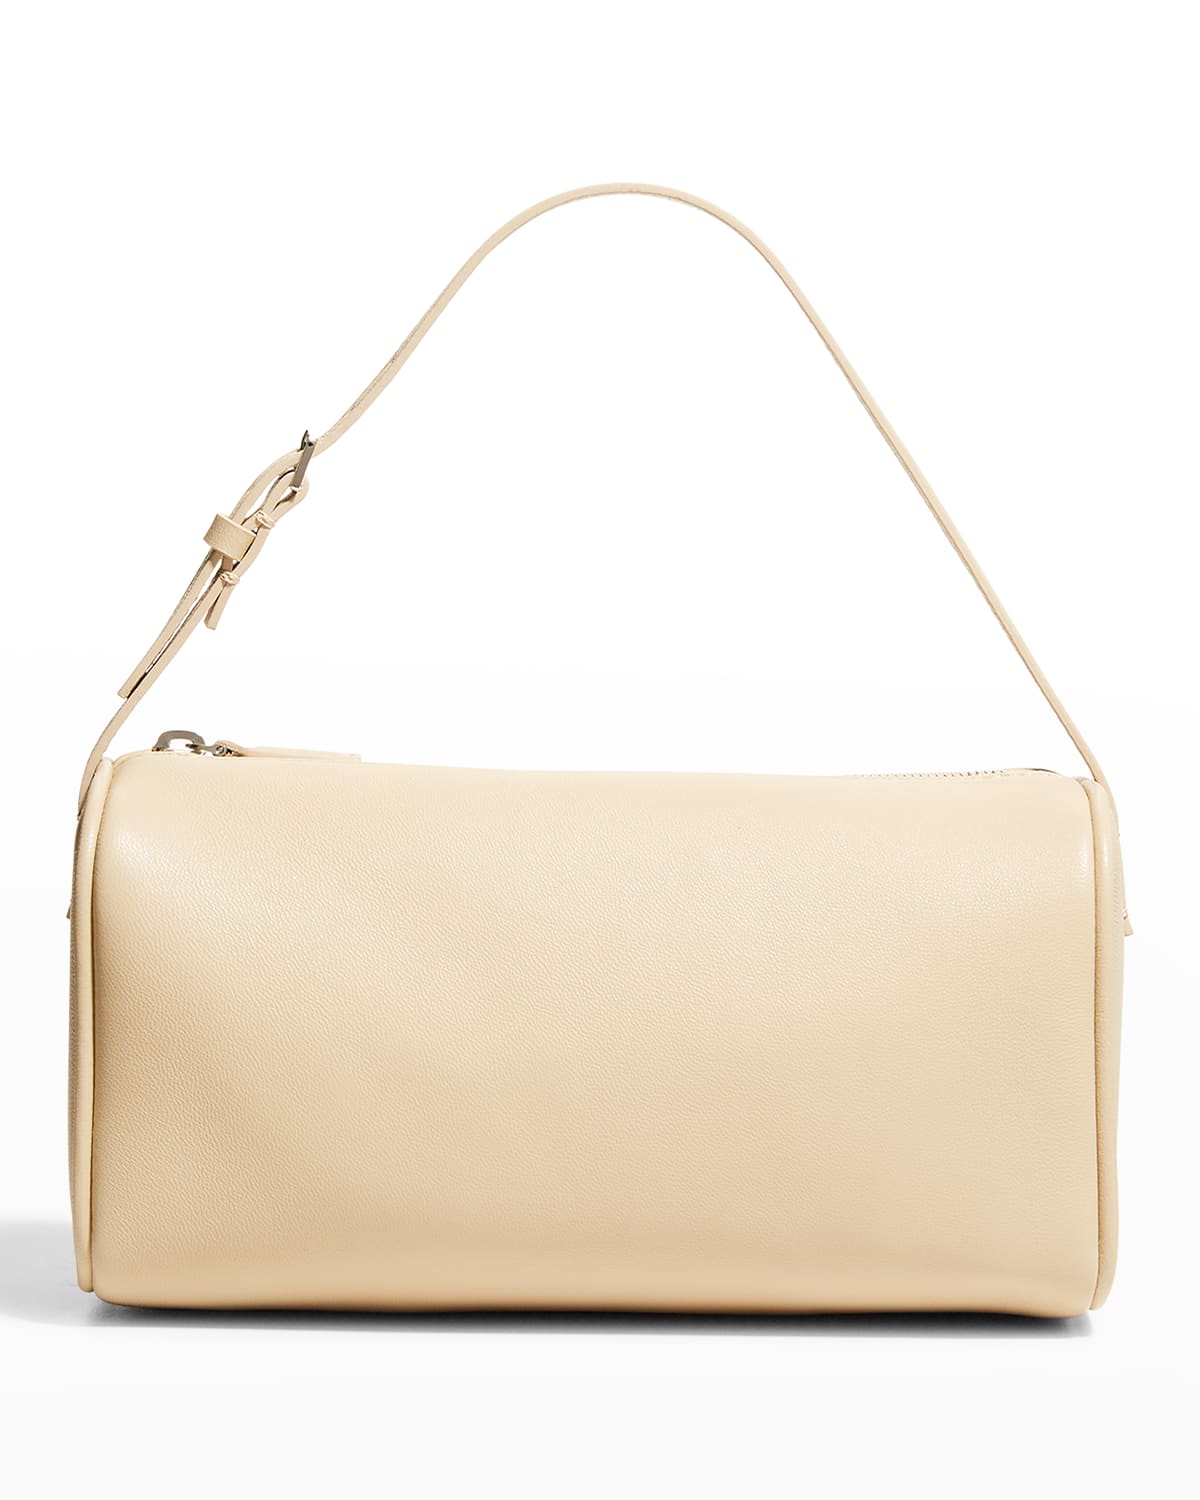 The Row, Jules ivory leather tote bag